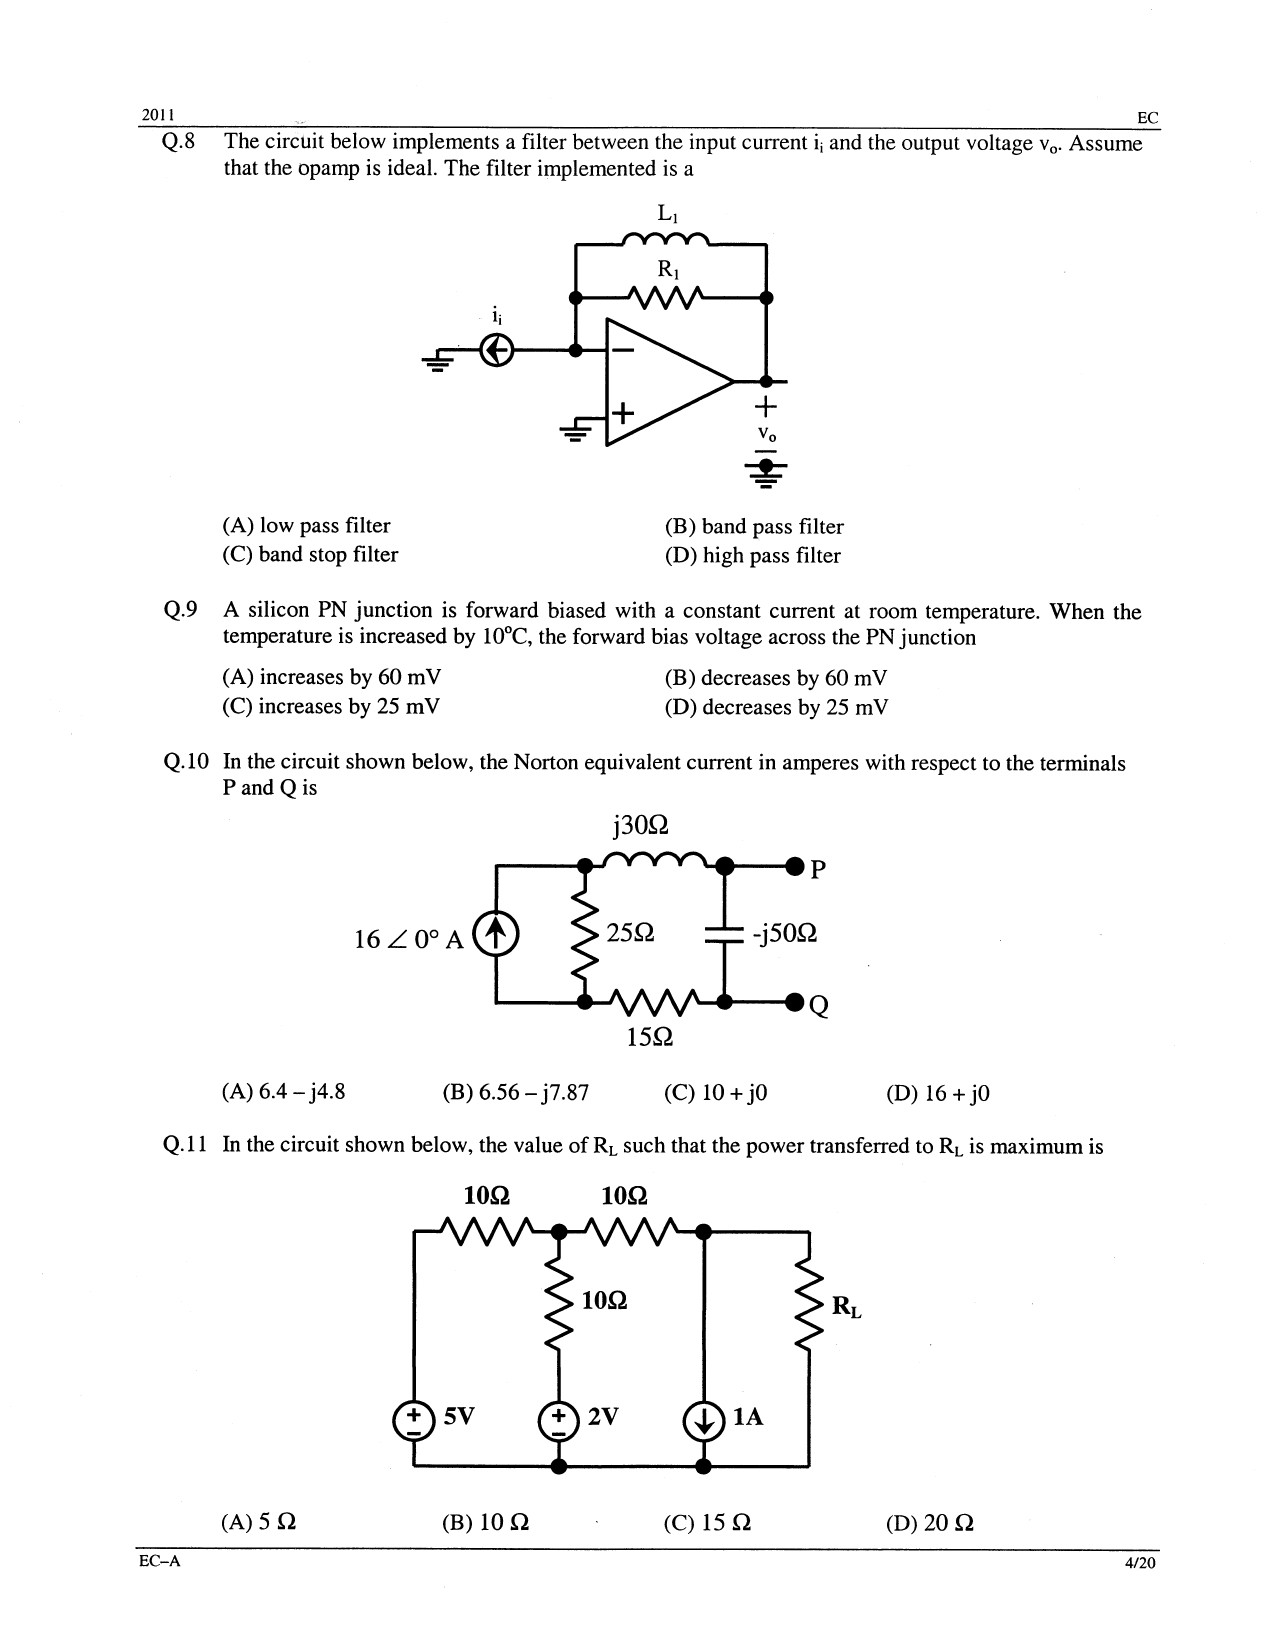 GATE Exam Question Paper 2011 Electronics and Communication Engineering 4